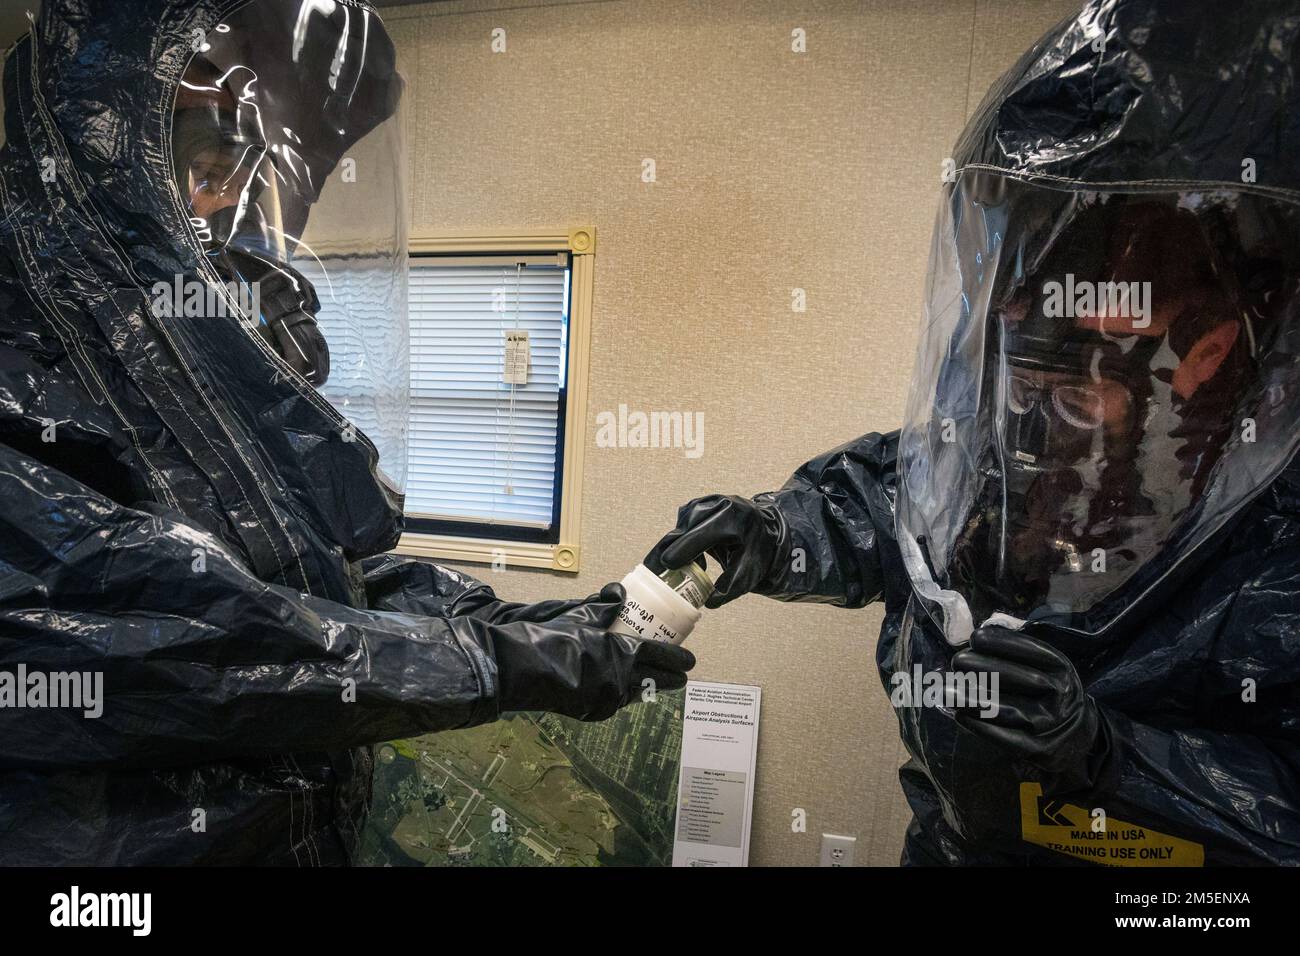 U.S. Army Sgt. Eric Boyer, right, places evidence into a container held by Staff Sgt. Nicky Lam, both survey team members with the 21st Weapons of Mass Destruction-Civil Support Team (21st WMD-CST), New Jersey National Guard, at a simulated crime scene during an Army North training exercise at the William J. Hughes Technical Center, Federal Aviation Administration, Egg Harbor Township, New Jersey, March 3, 2022. The 21st identifies chemical, biological, radiological, and nuclear substances; assesses and advises civil authorities on response measures to man-made or natural disasters. (New Jerse Stock Photo